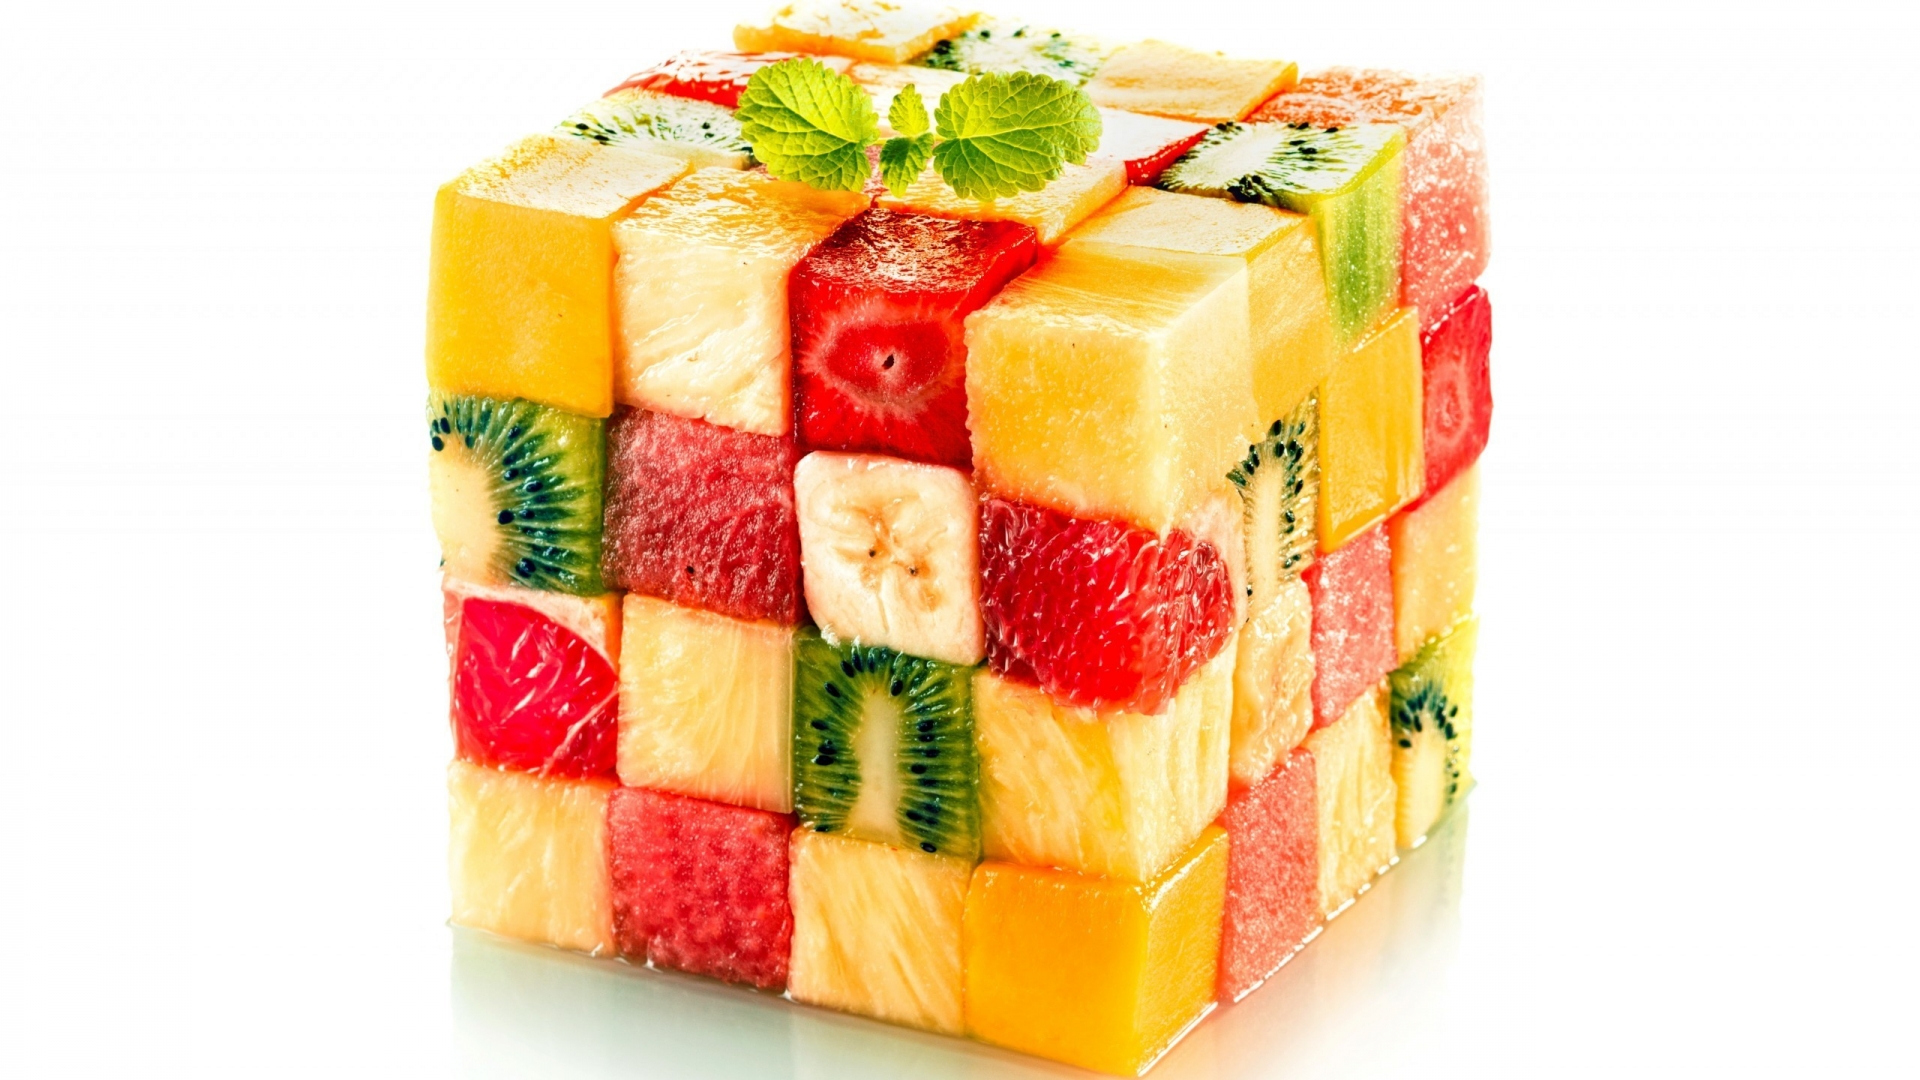 Fruit Salad Cube for 1920 x 1080 HDTV 1080p resolution